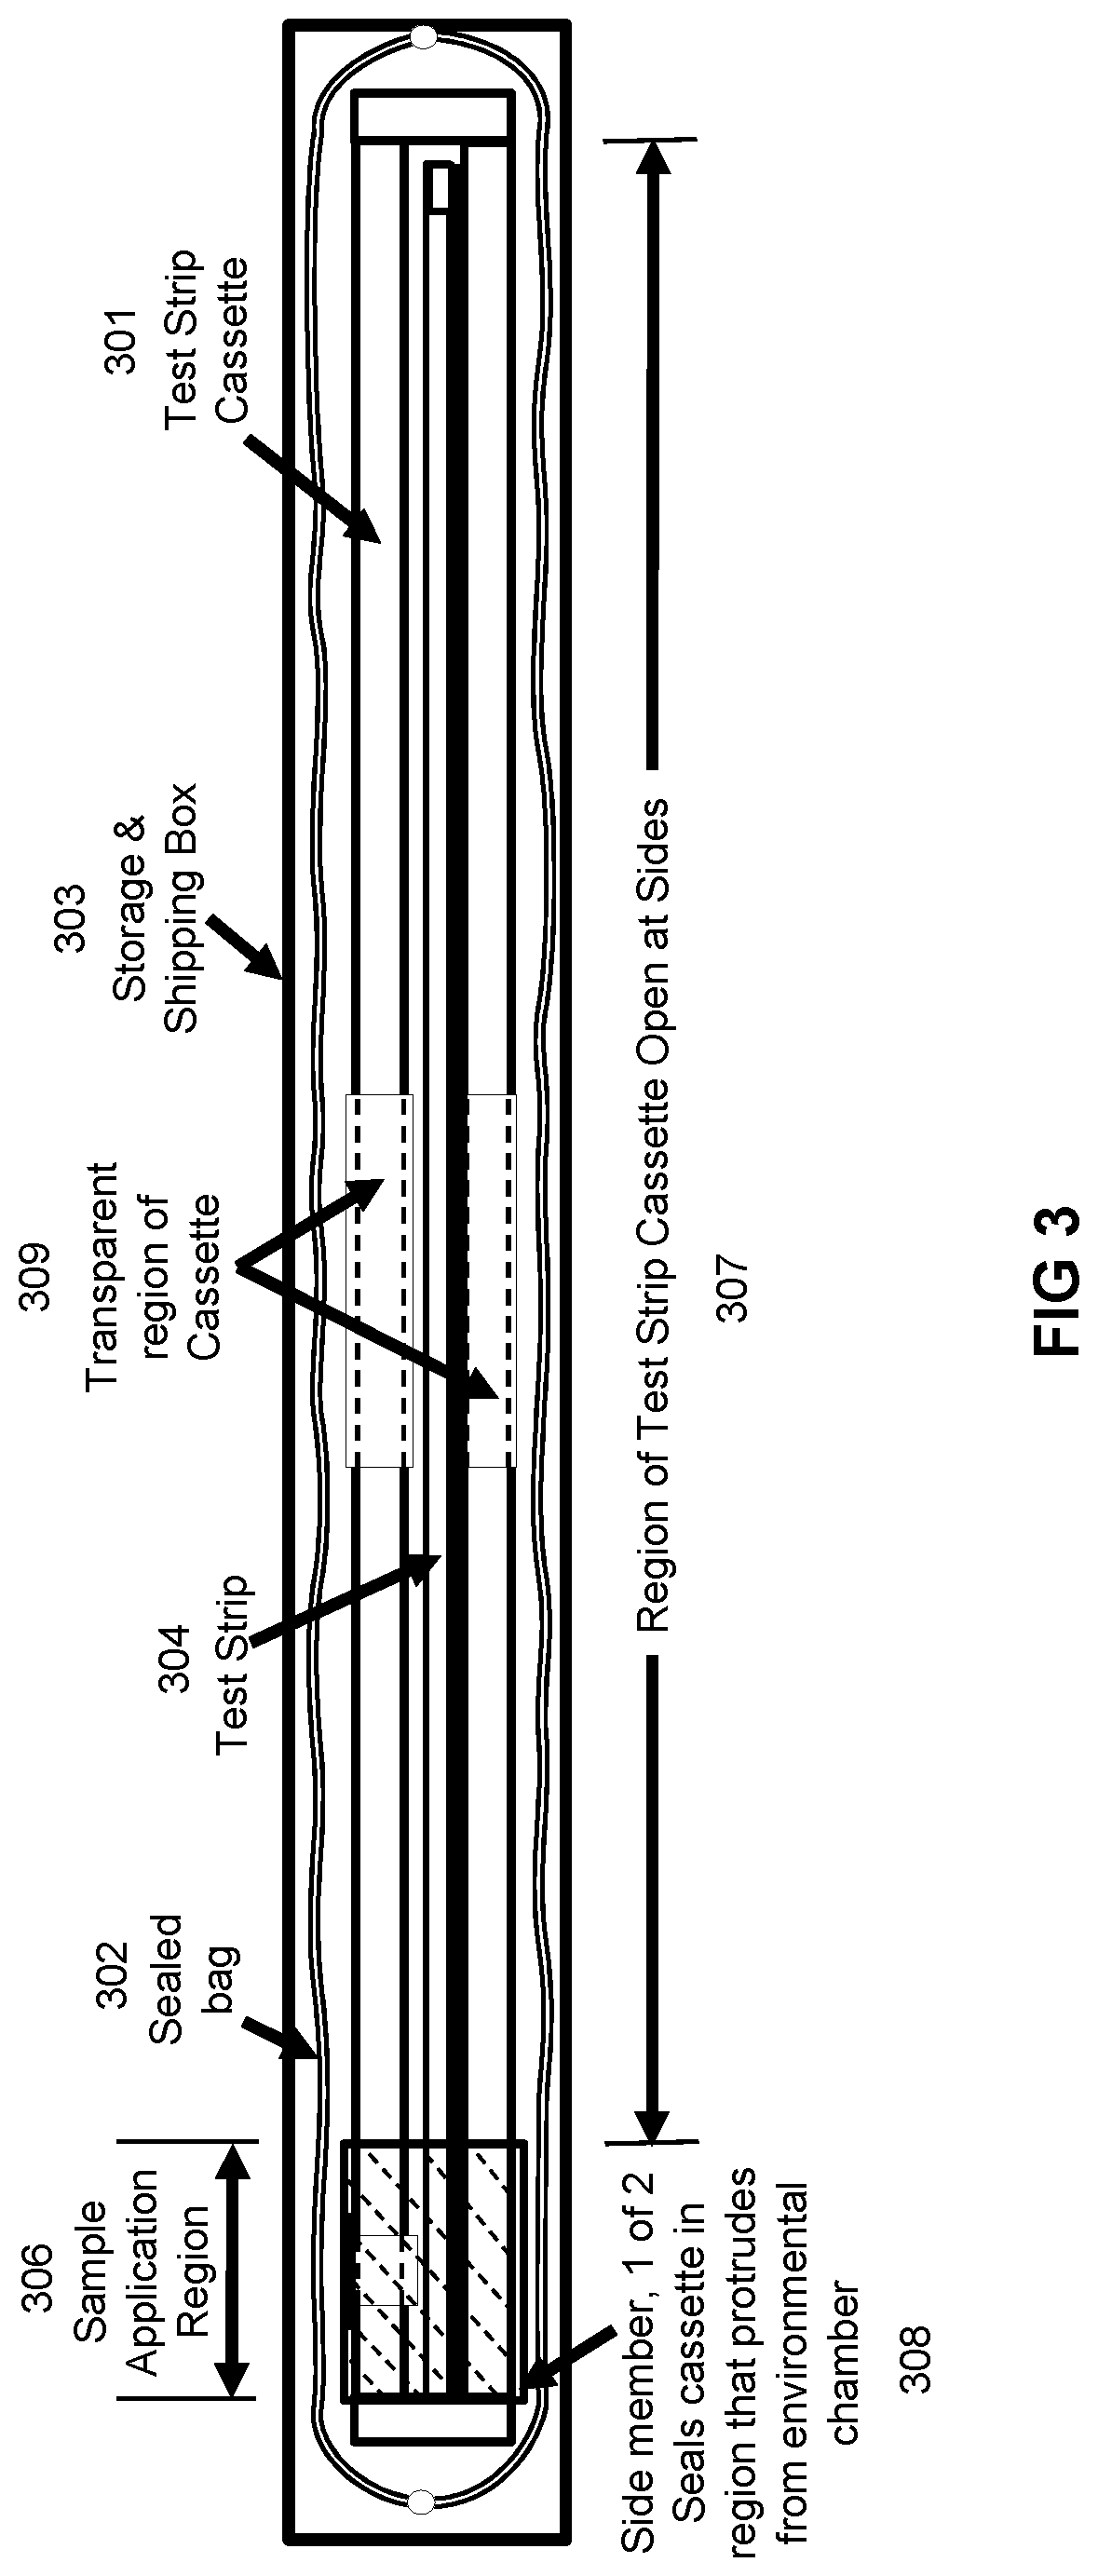 Method and apparatus to provide connected, in-situ, comprehensive, and accurate lateral flow assays